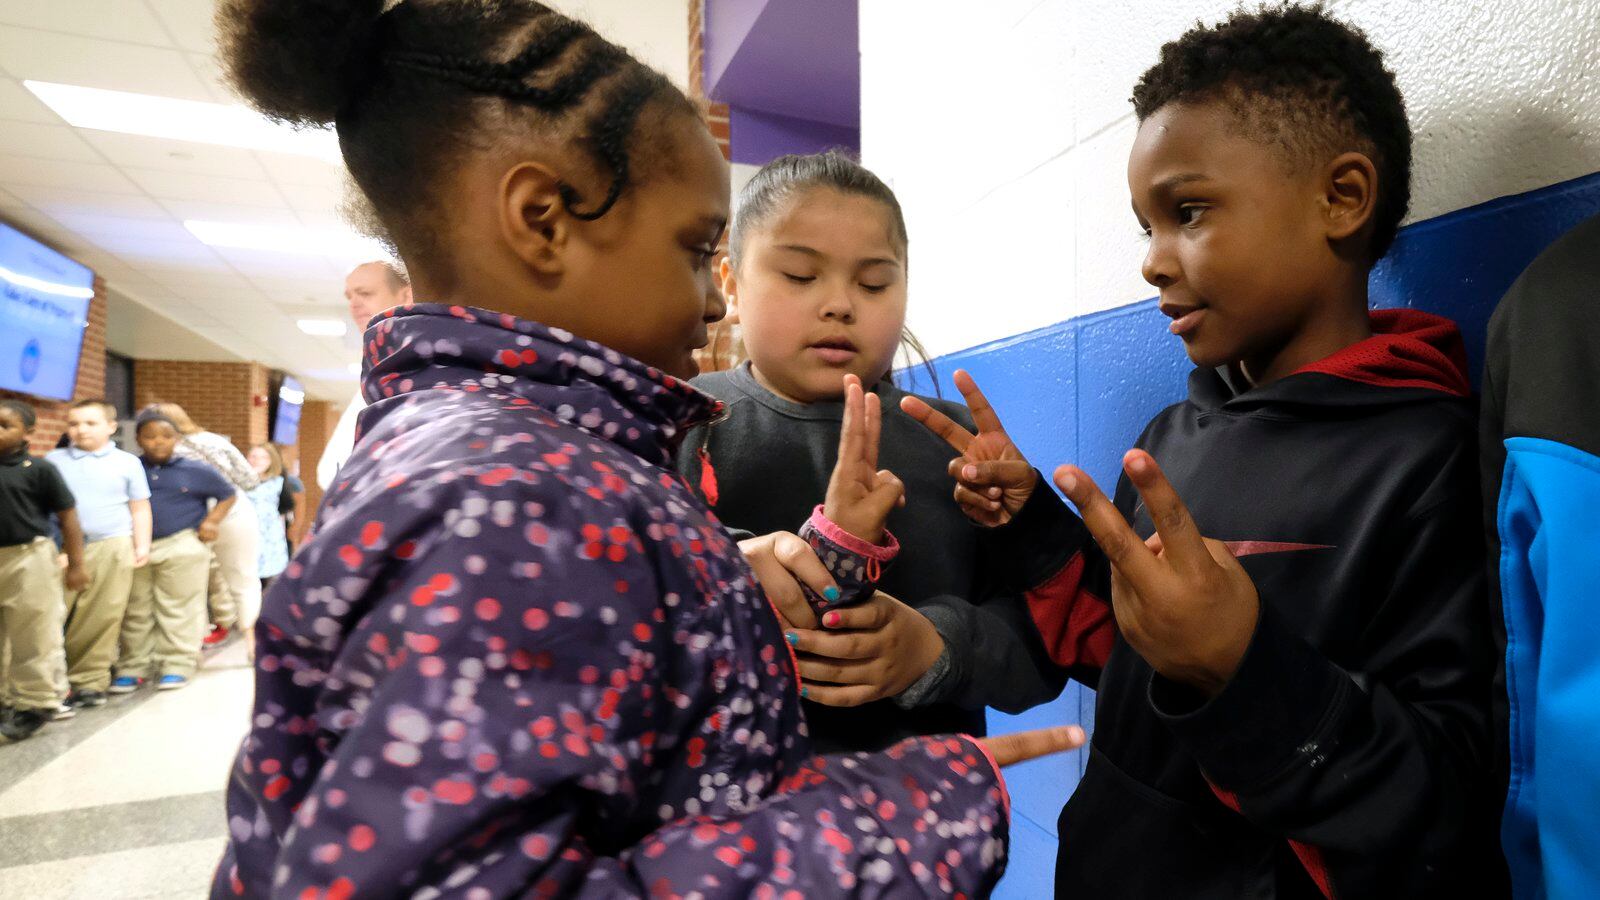 Students interact with one another before class at Thomas Gregg Neighborhood School, an elementary school in Indianapolis, Indiana.